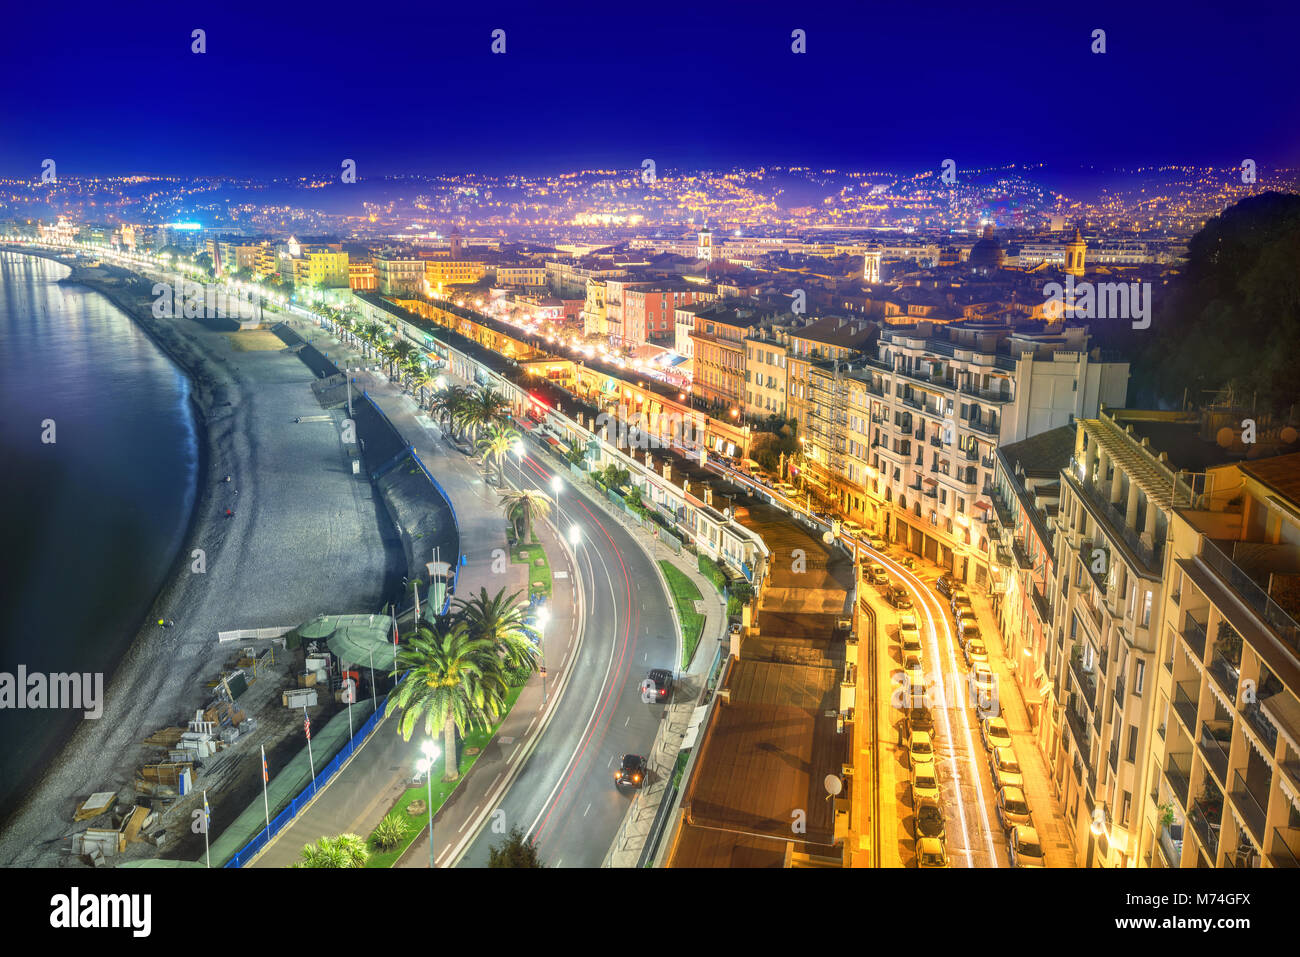 Waterfront and Promenade des Anglais in Nice at night. Cote d'Azur, French riviera, France Stock Photo